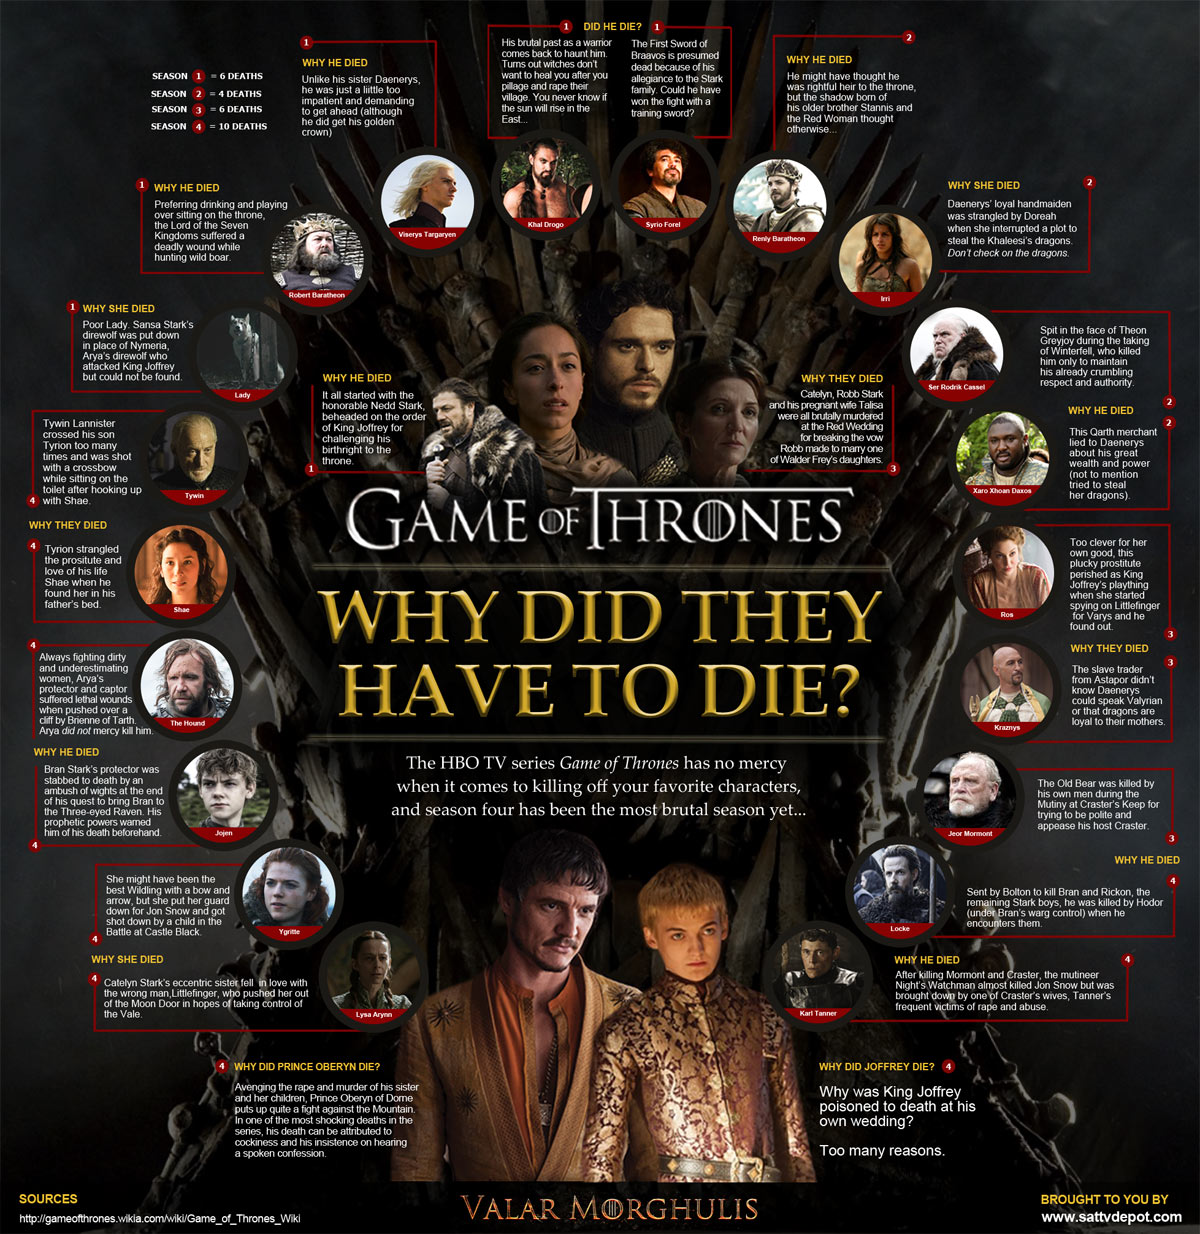 game-of-thrones-infographic-why-did-they-have-to-die1.jpg